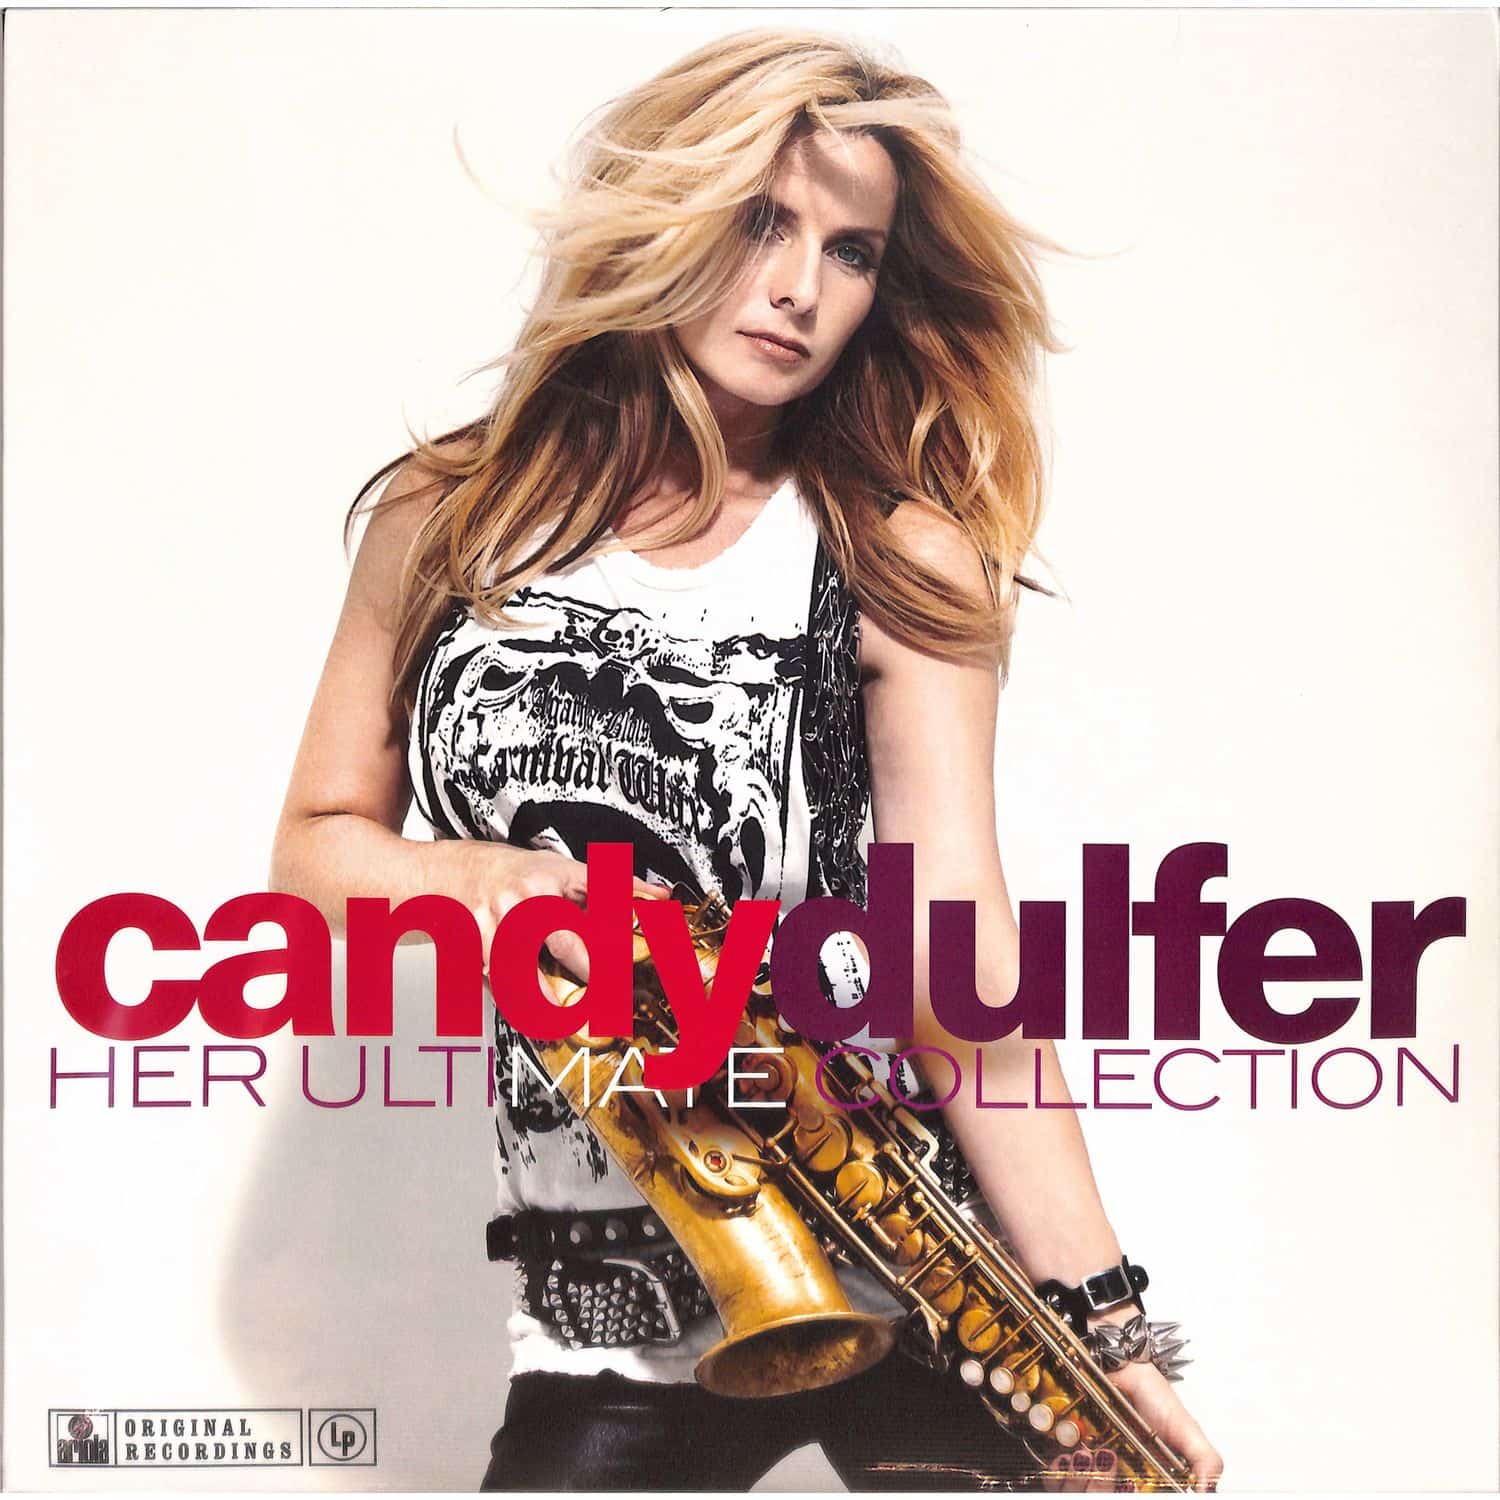 Candy Dulfer - HER ULTIMATE COLLECTION